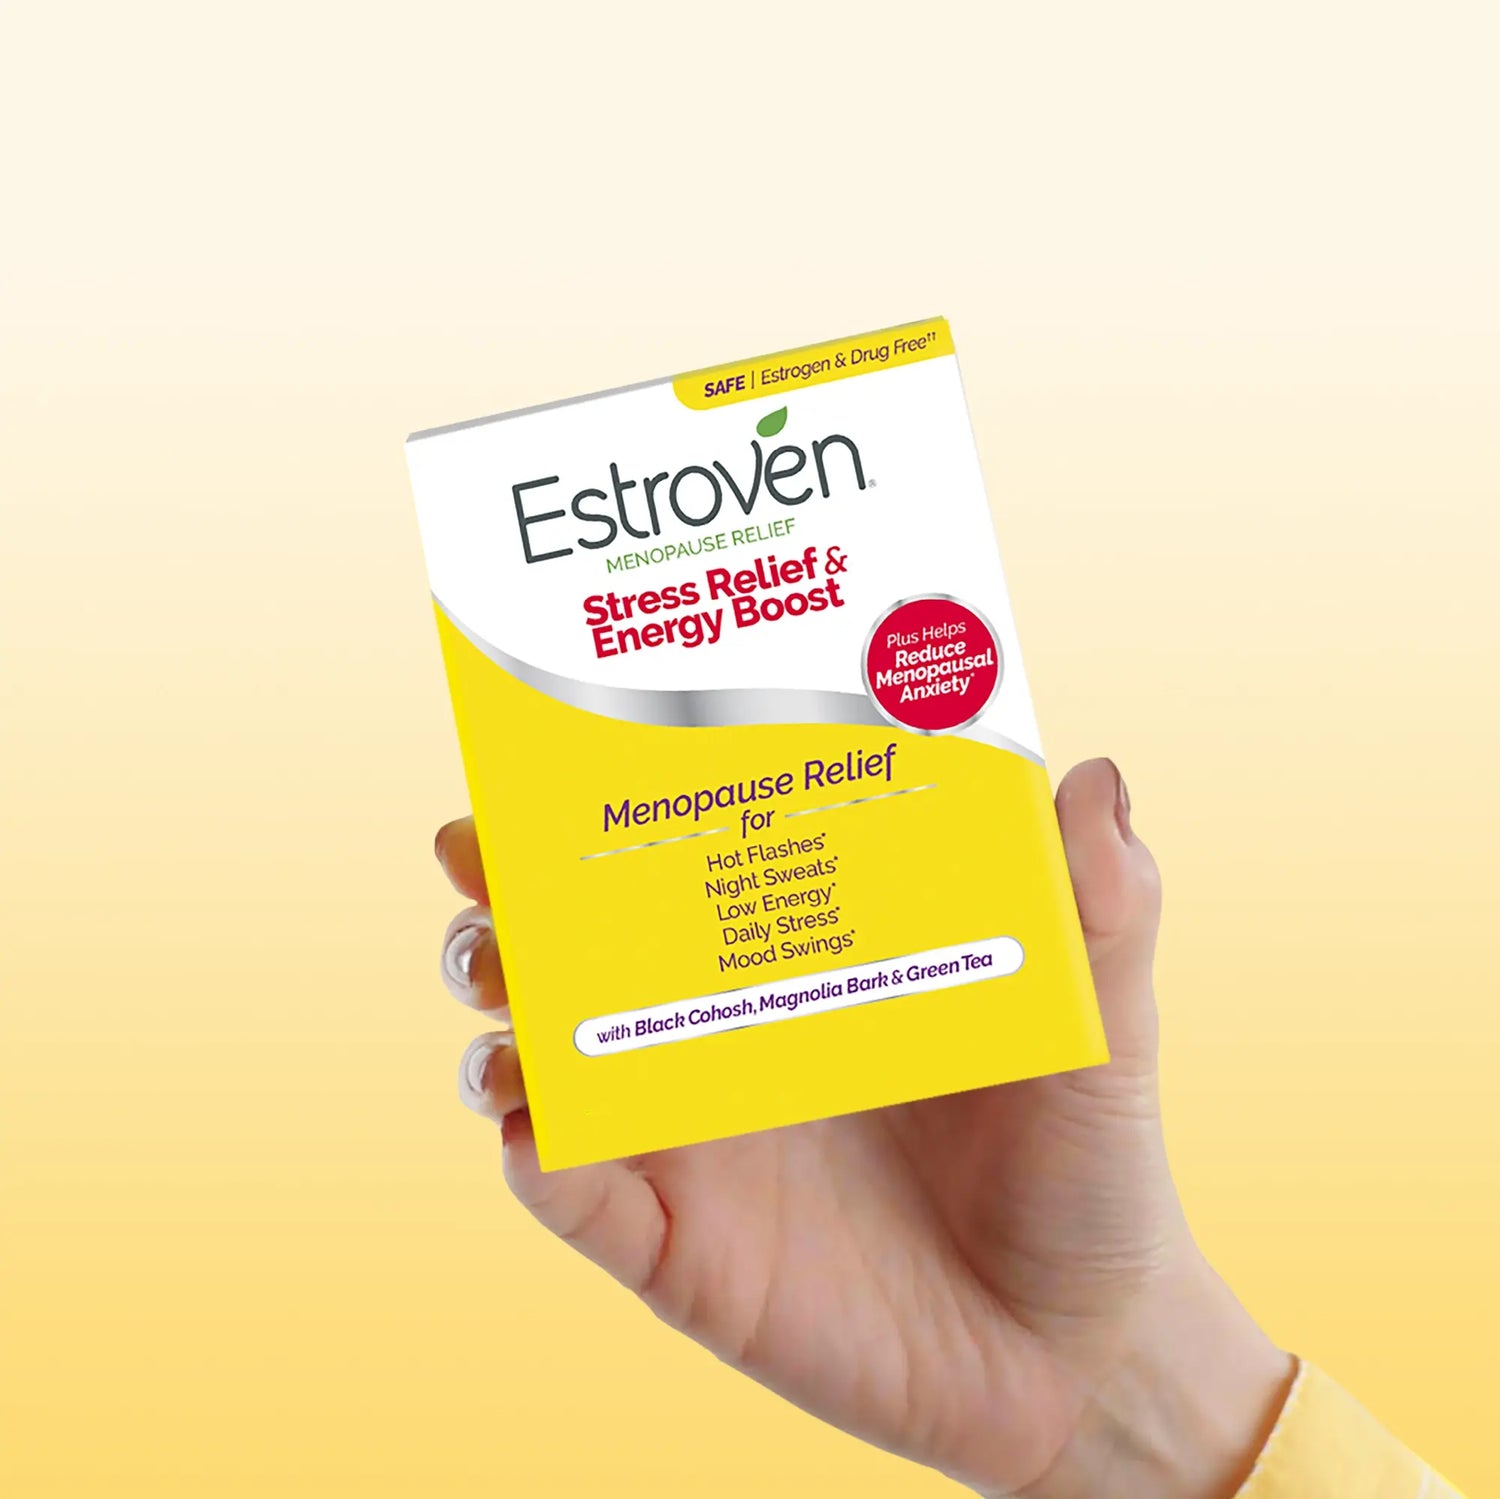 hand holding box of Estroven Sress Relief & Energy Boost